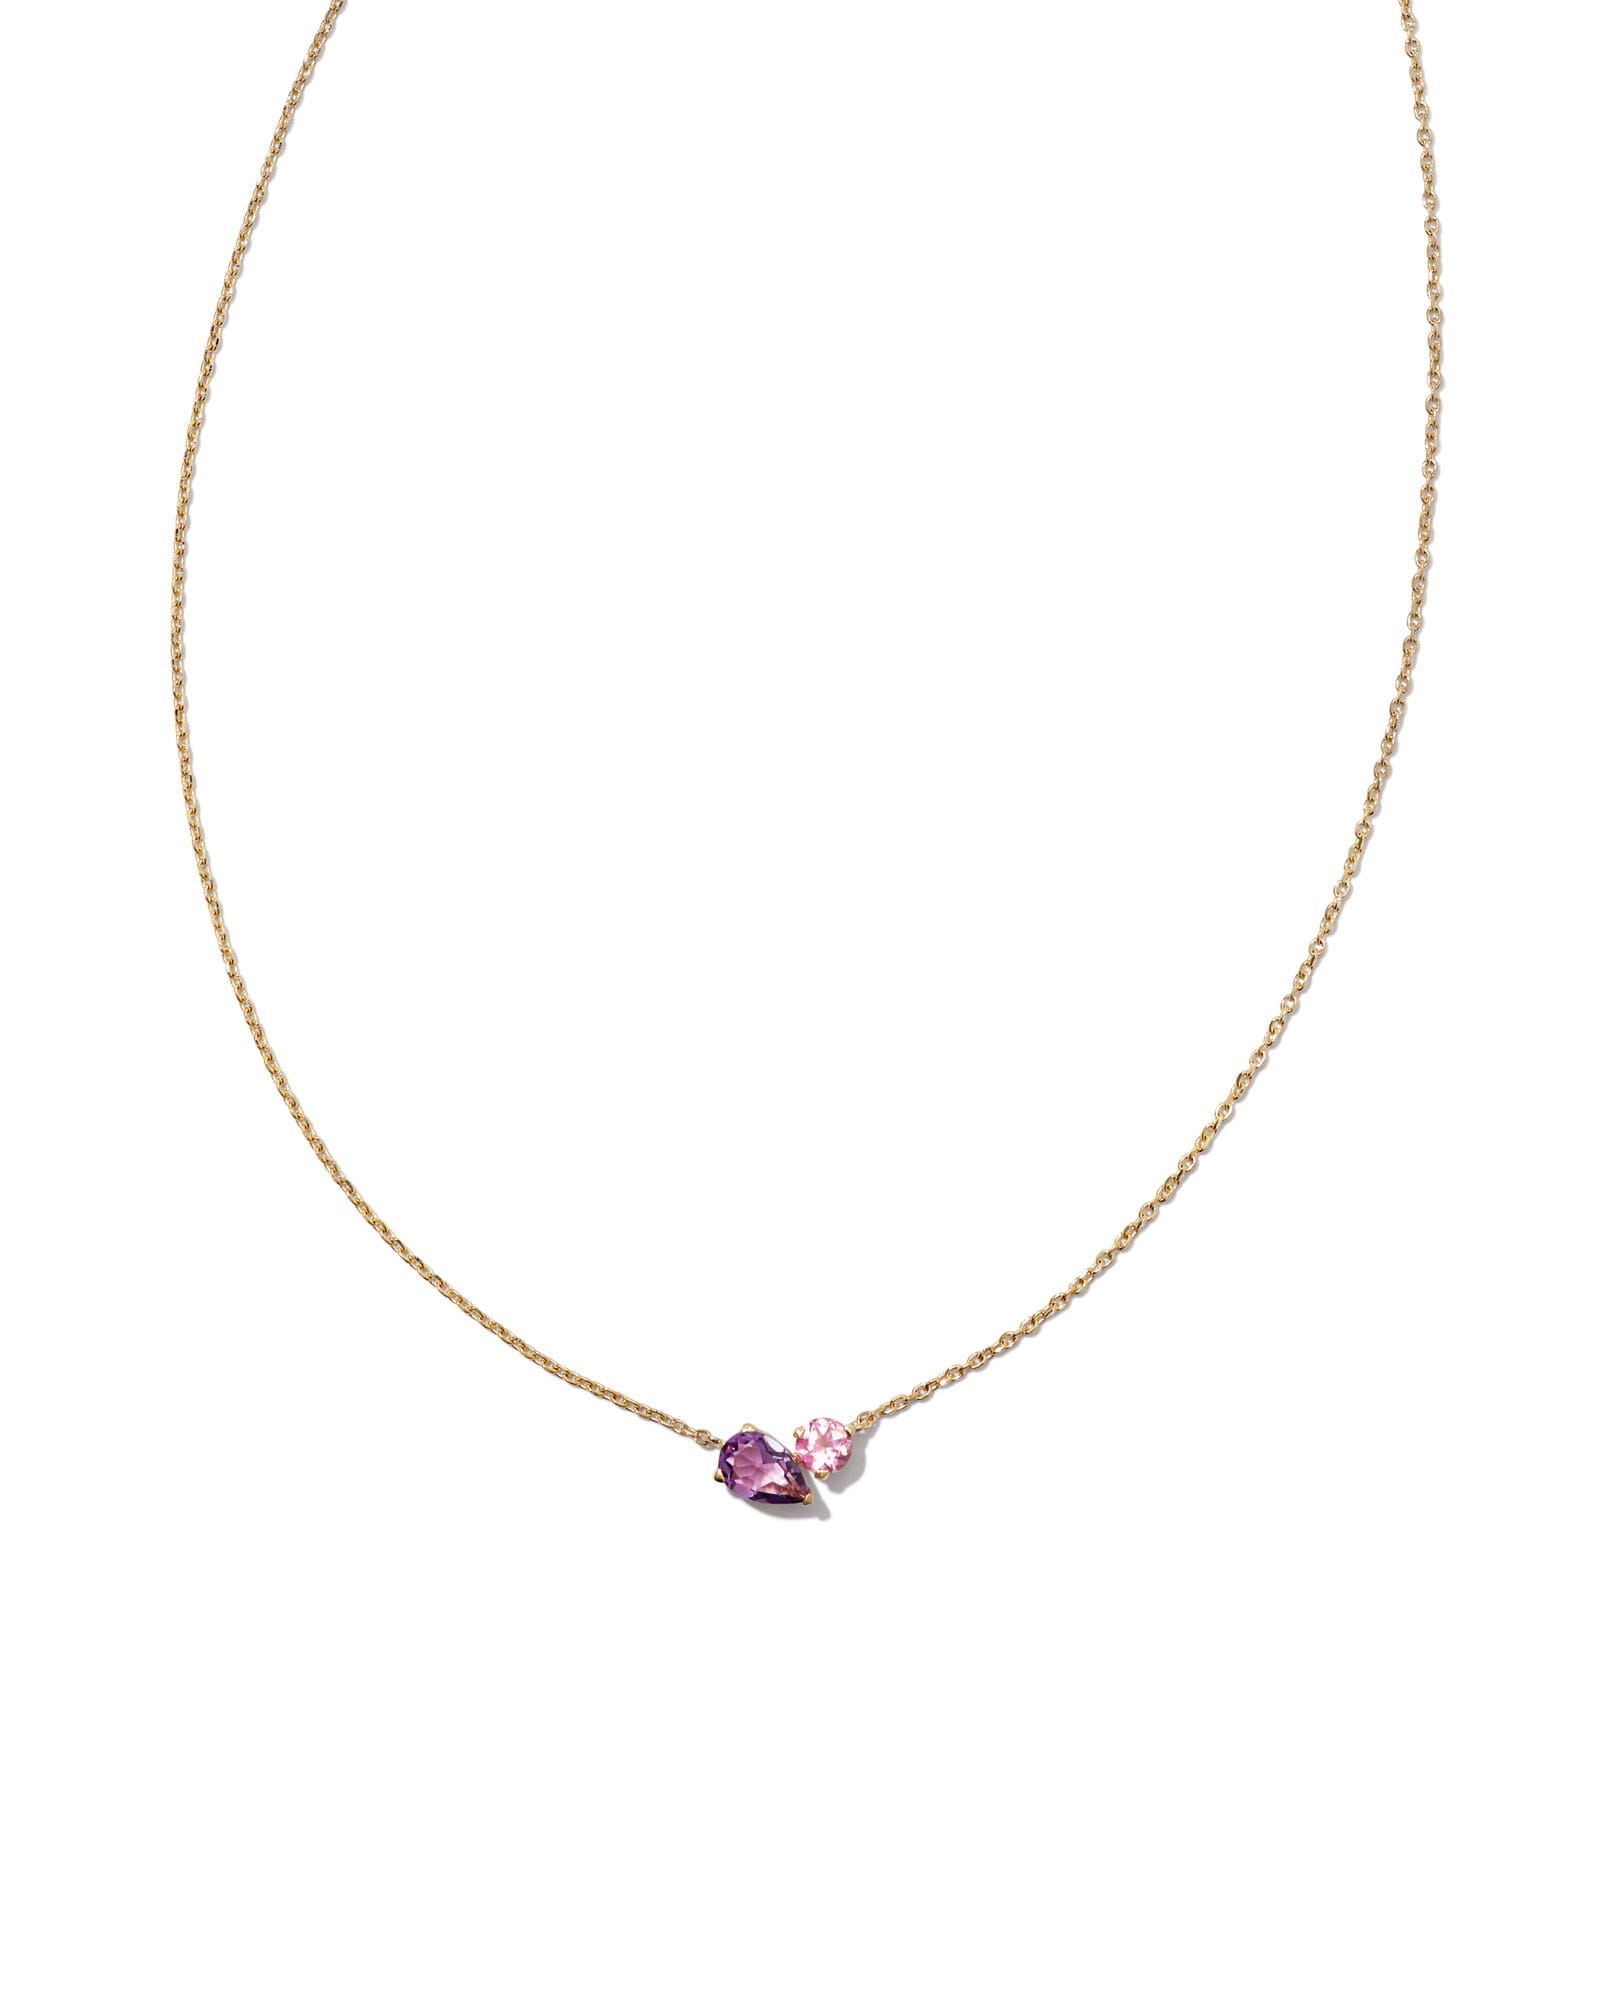 Toi et Moi 14k Yellow Gold Pendant Necklace in Light Pink Sapphire and Pink Tourmaline